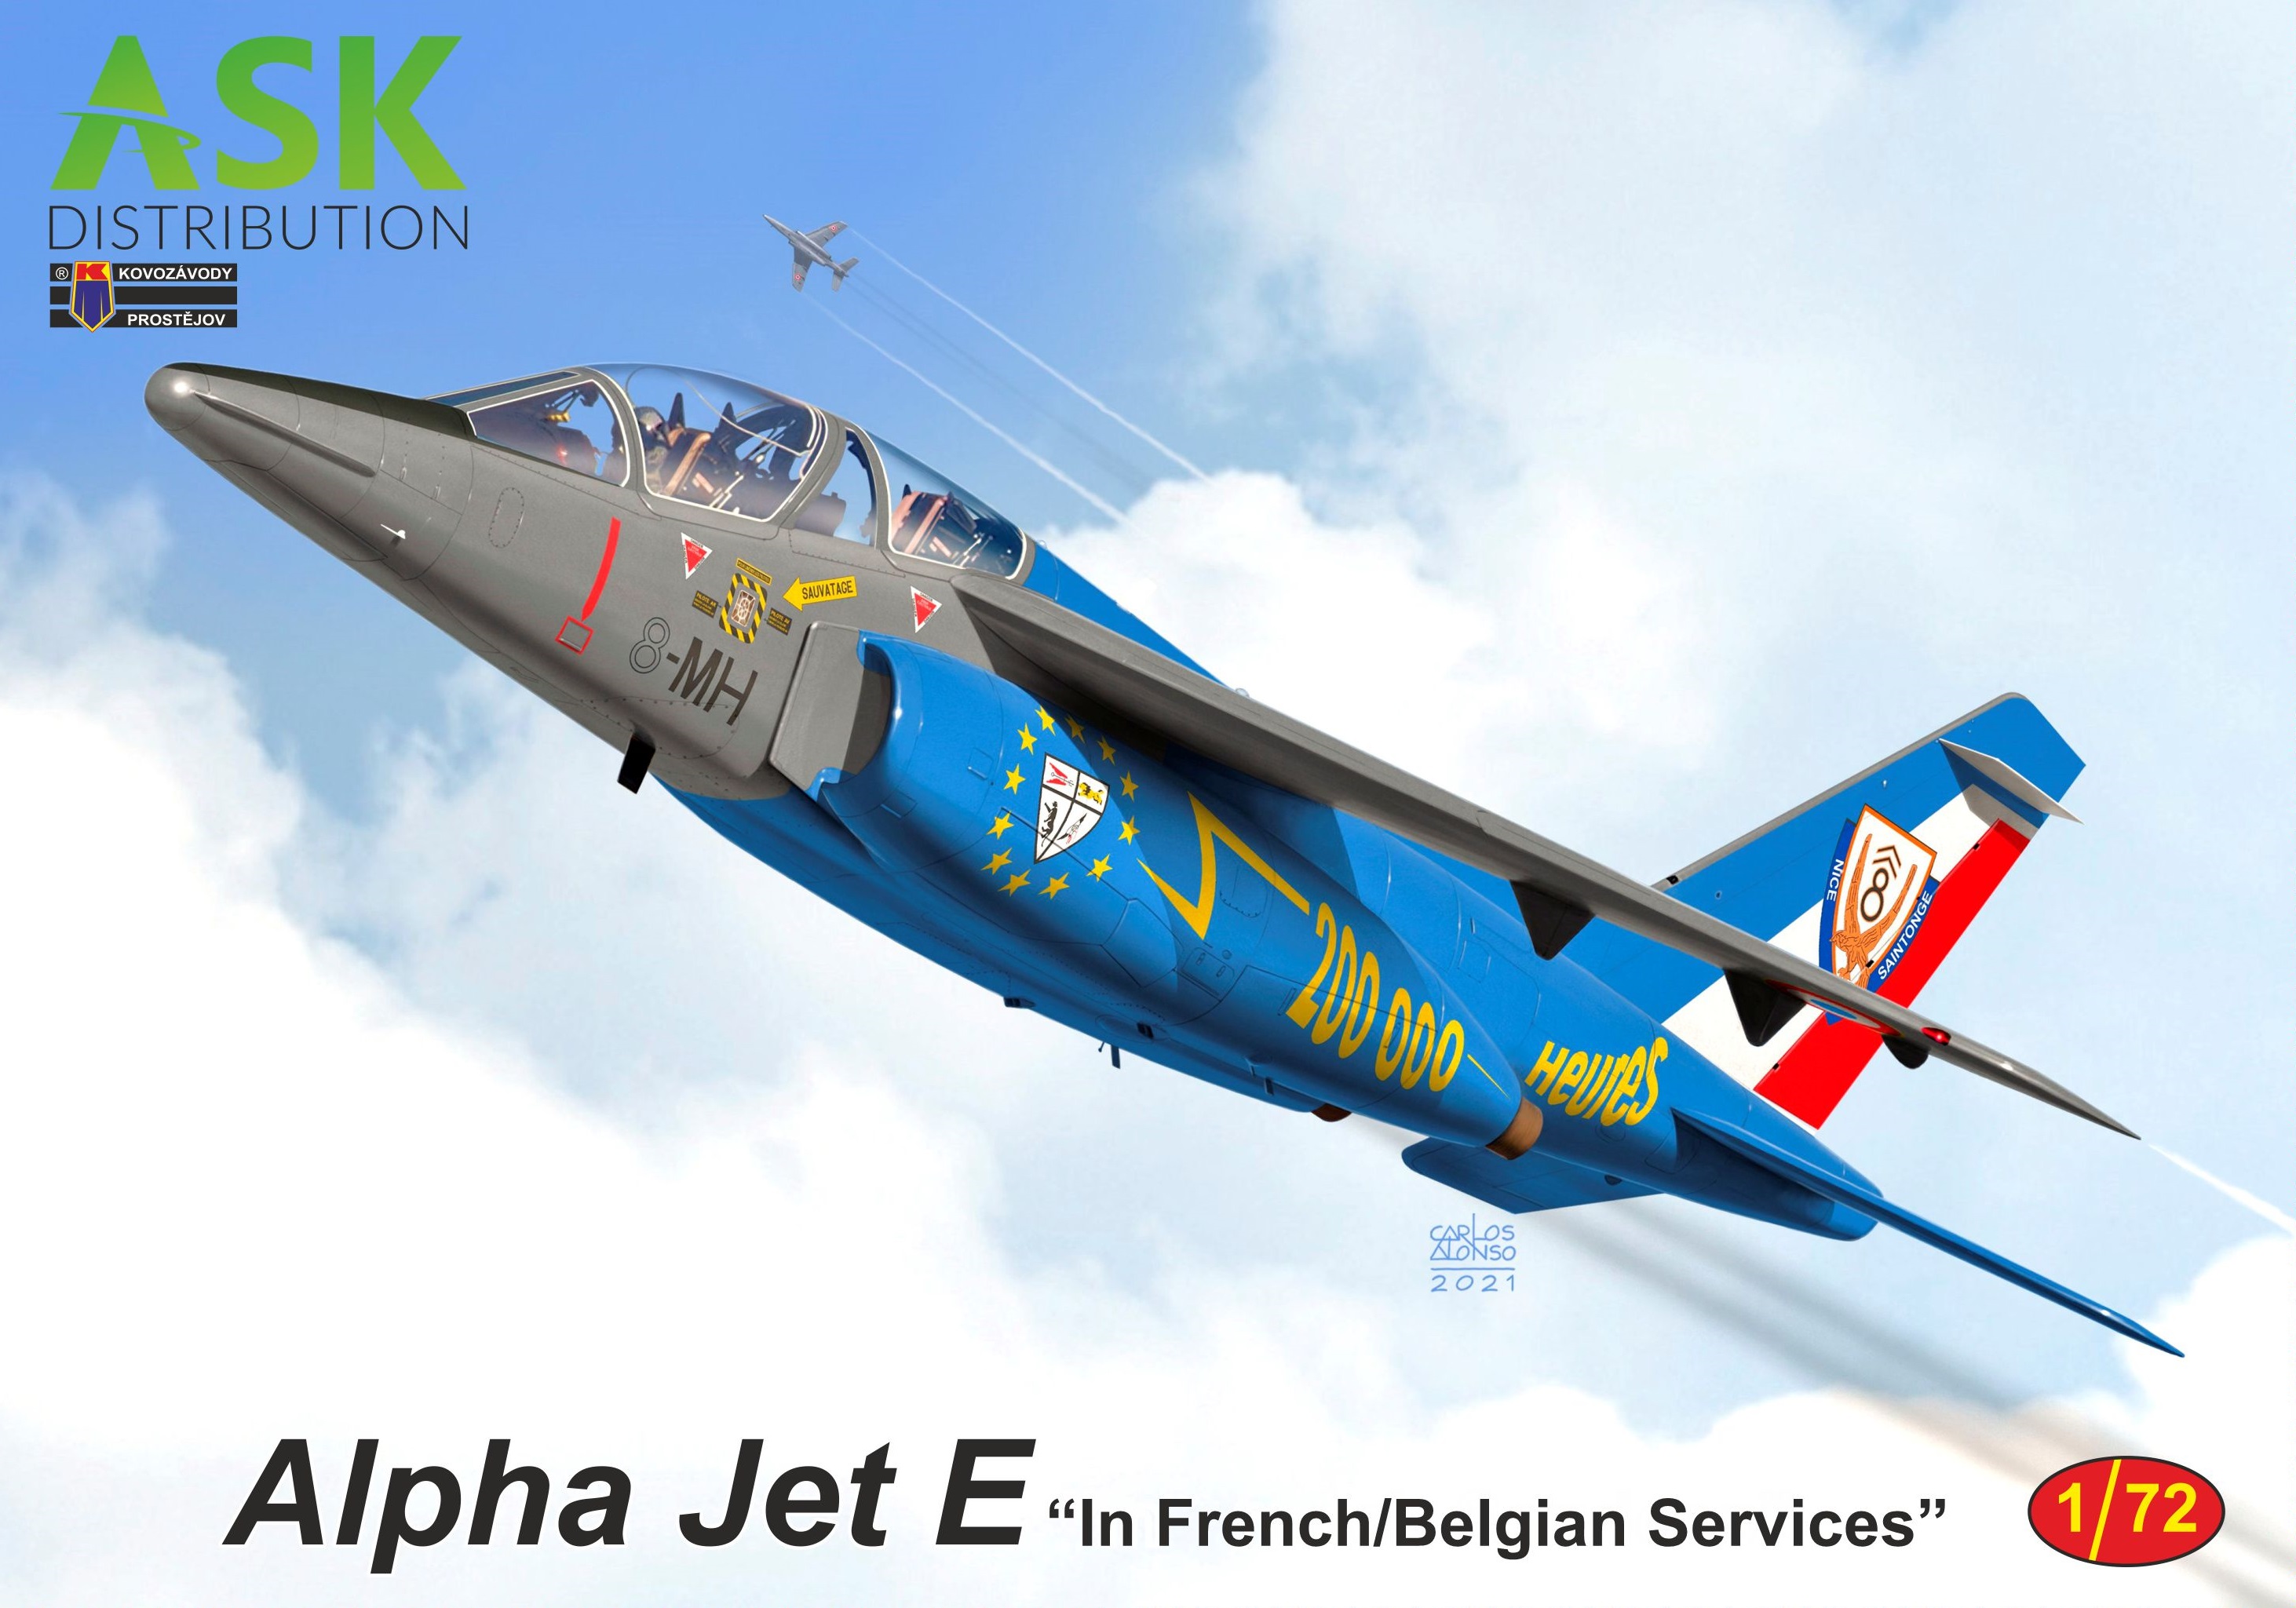 1/72 Alpha Jet in French/Belgian Services, ASK Distribution limited edition